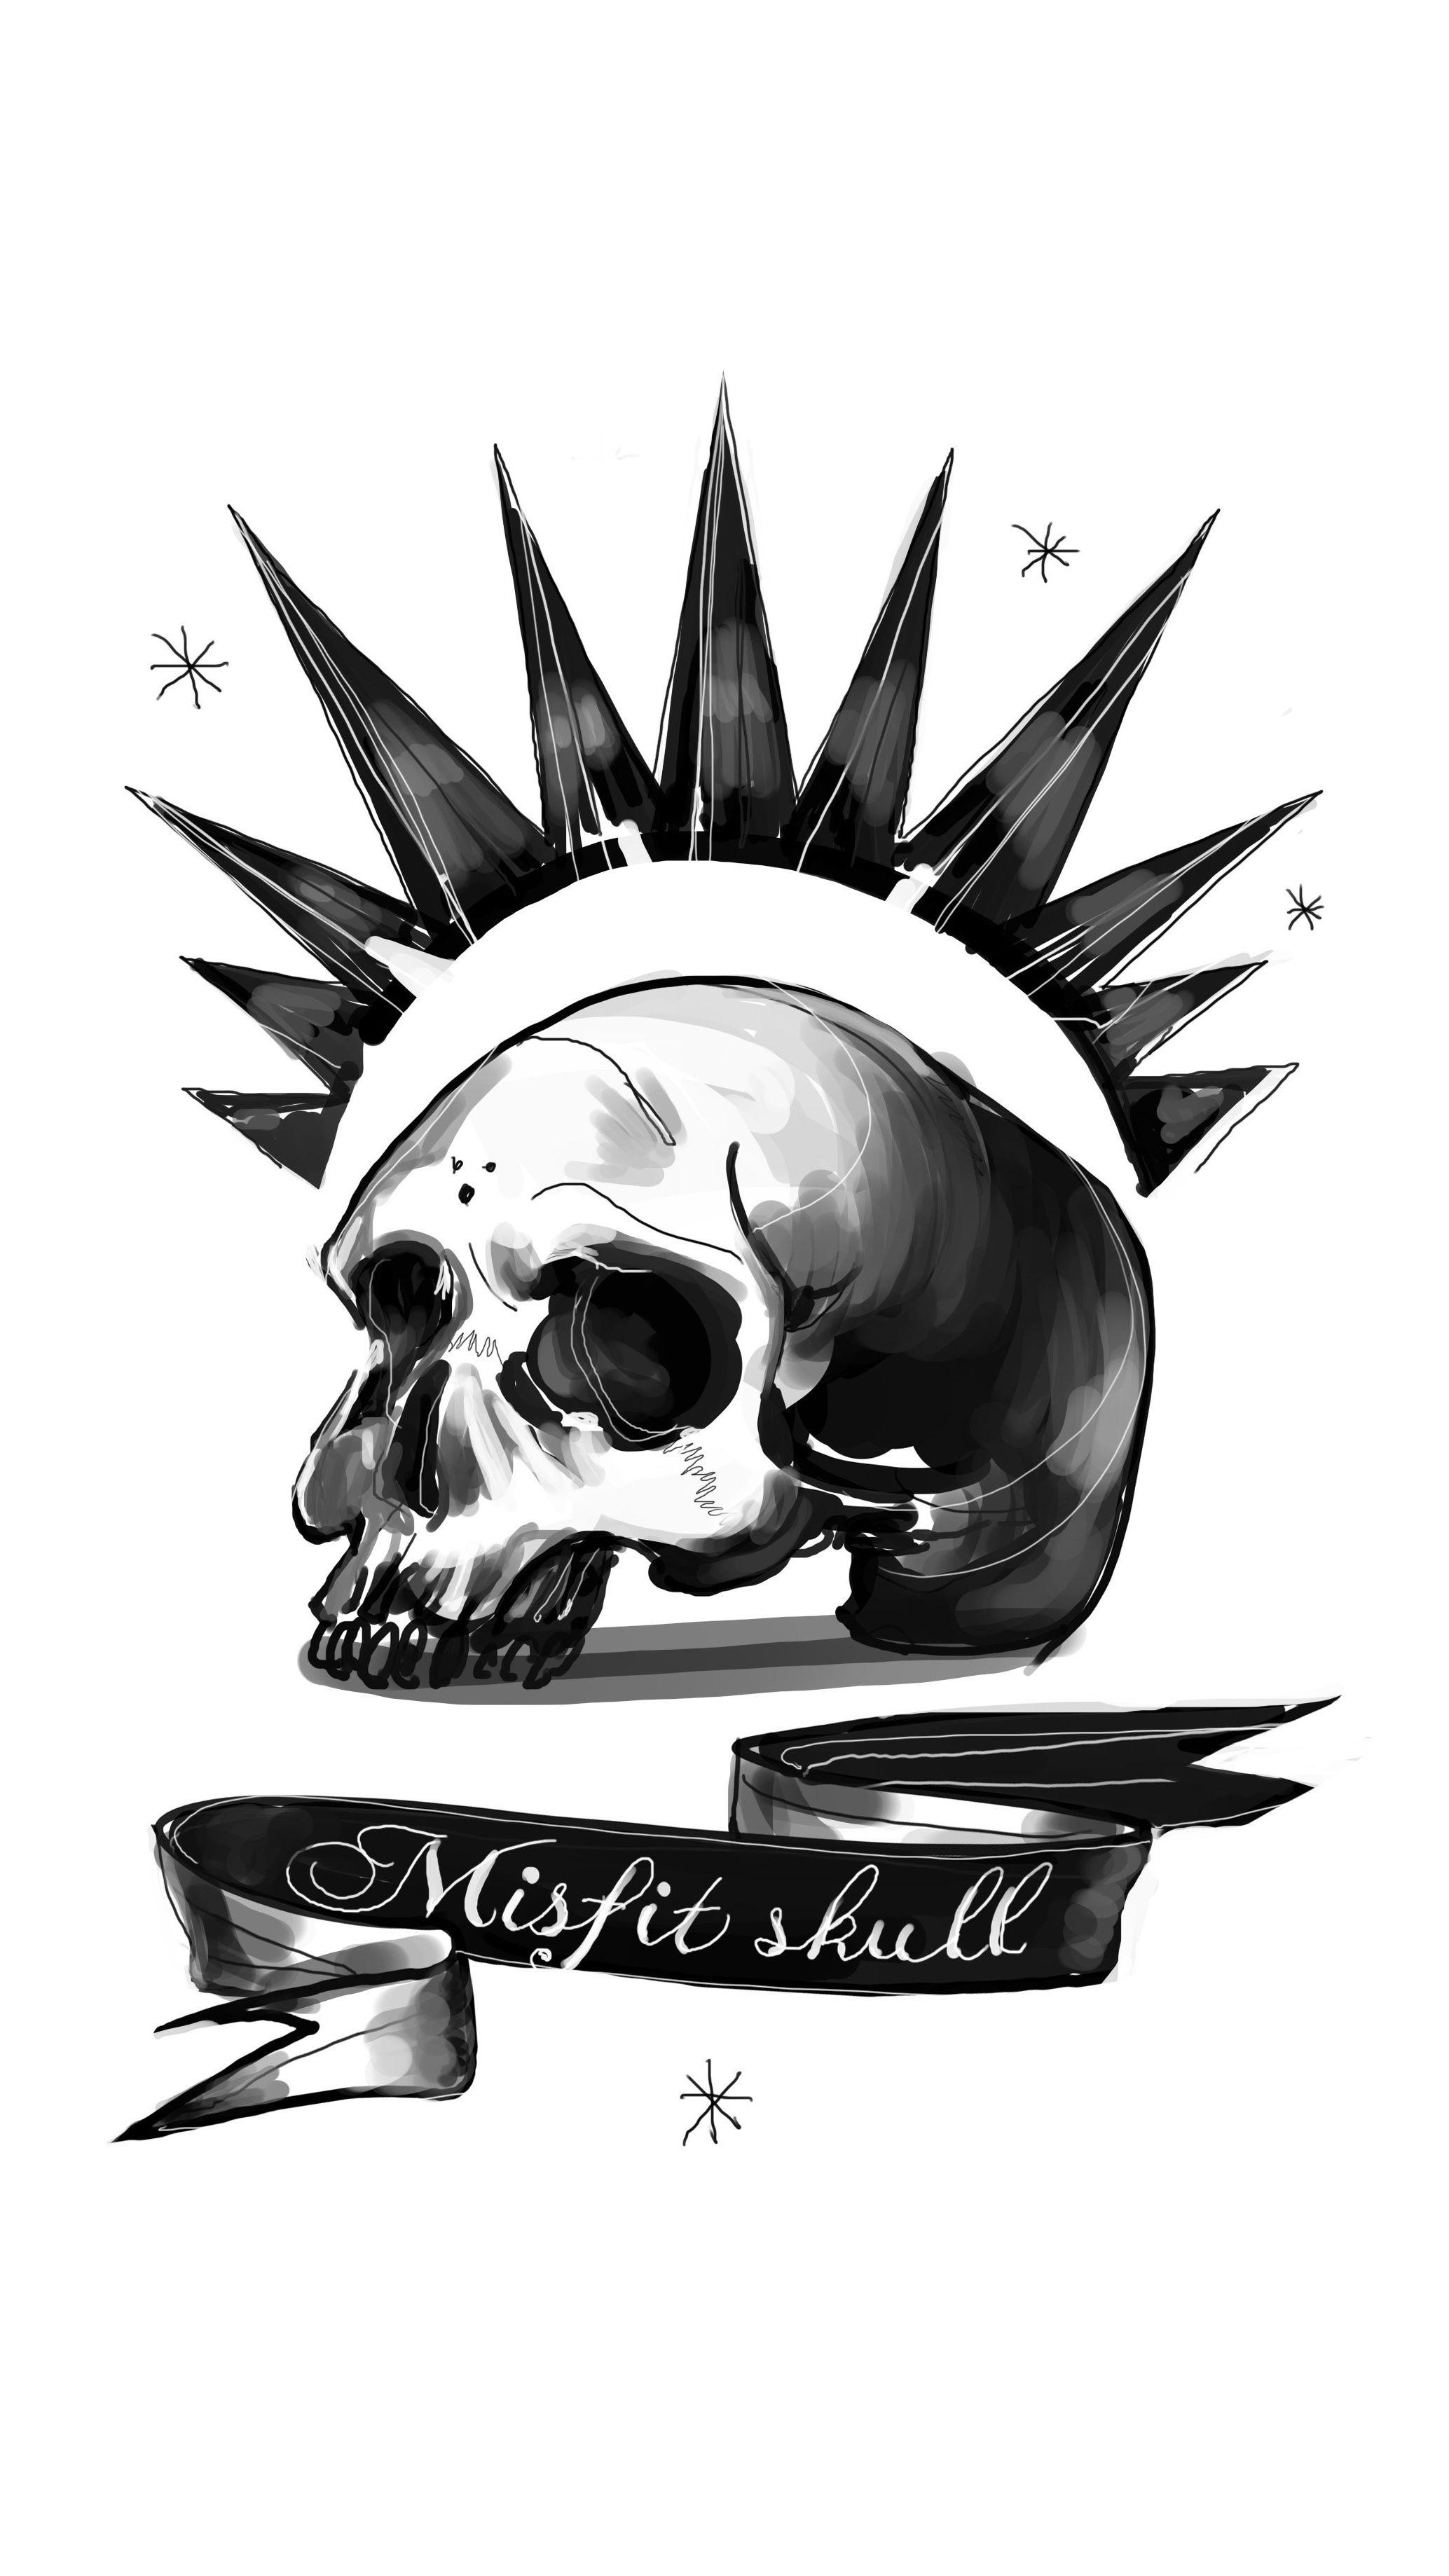 No Spoilers Made a Misfit Skull mobile wallpaper. Feel free to